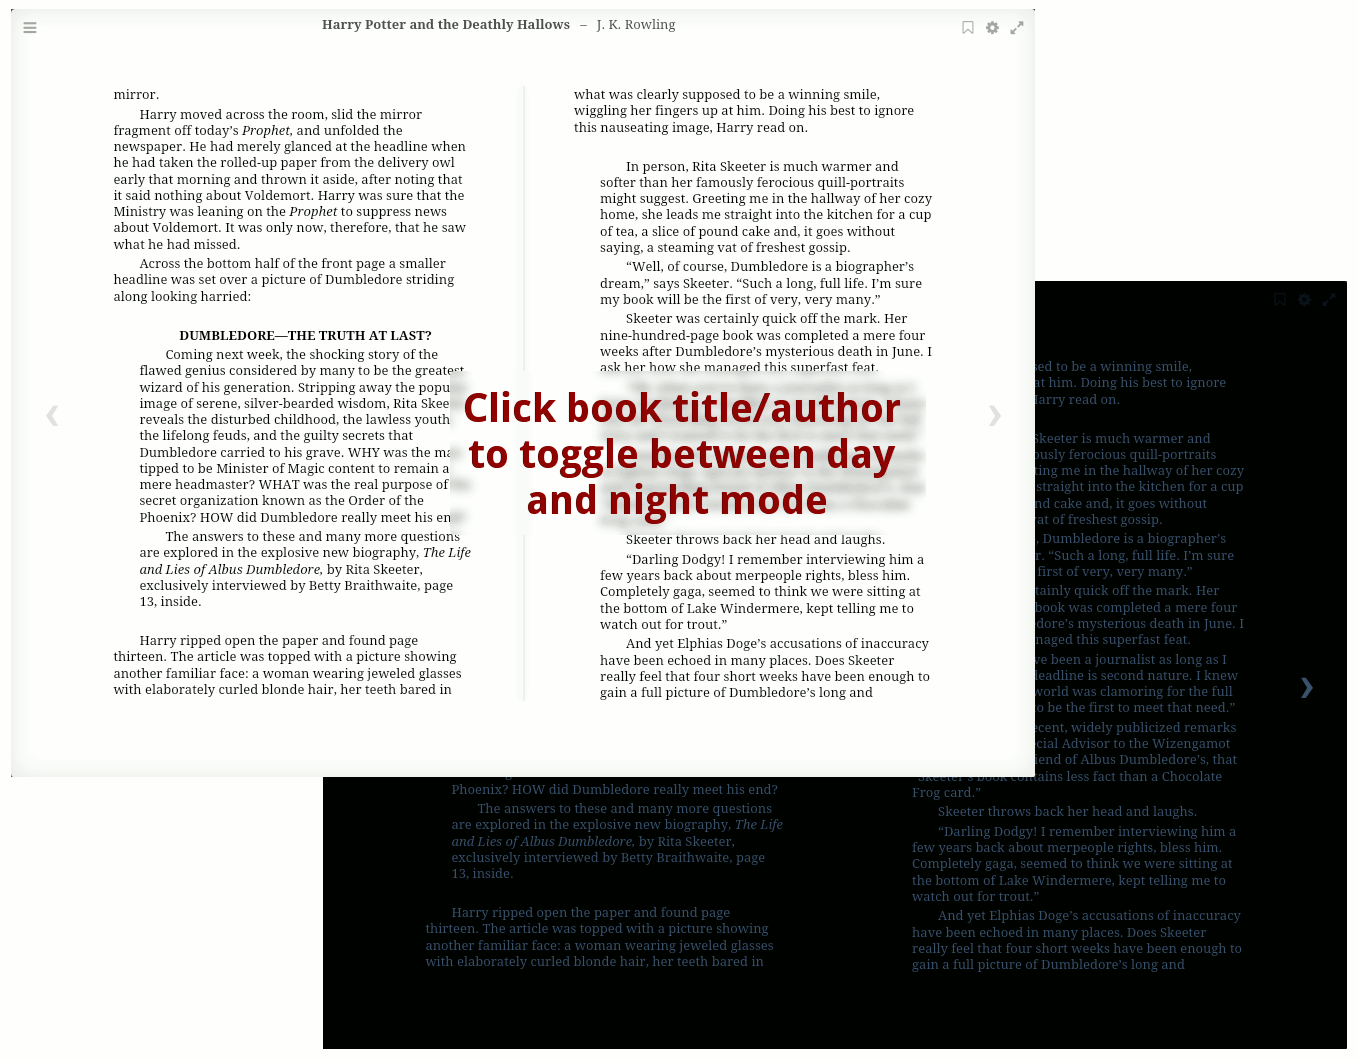 Reader showing page spread in 'night mode'